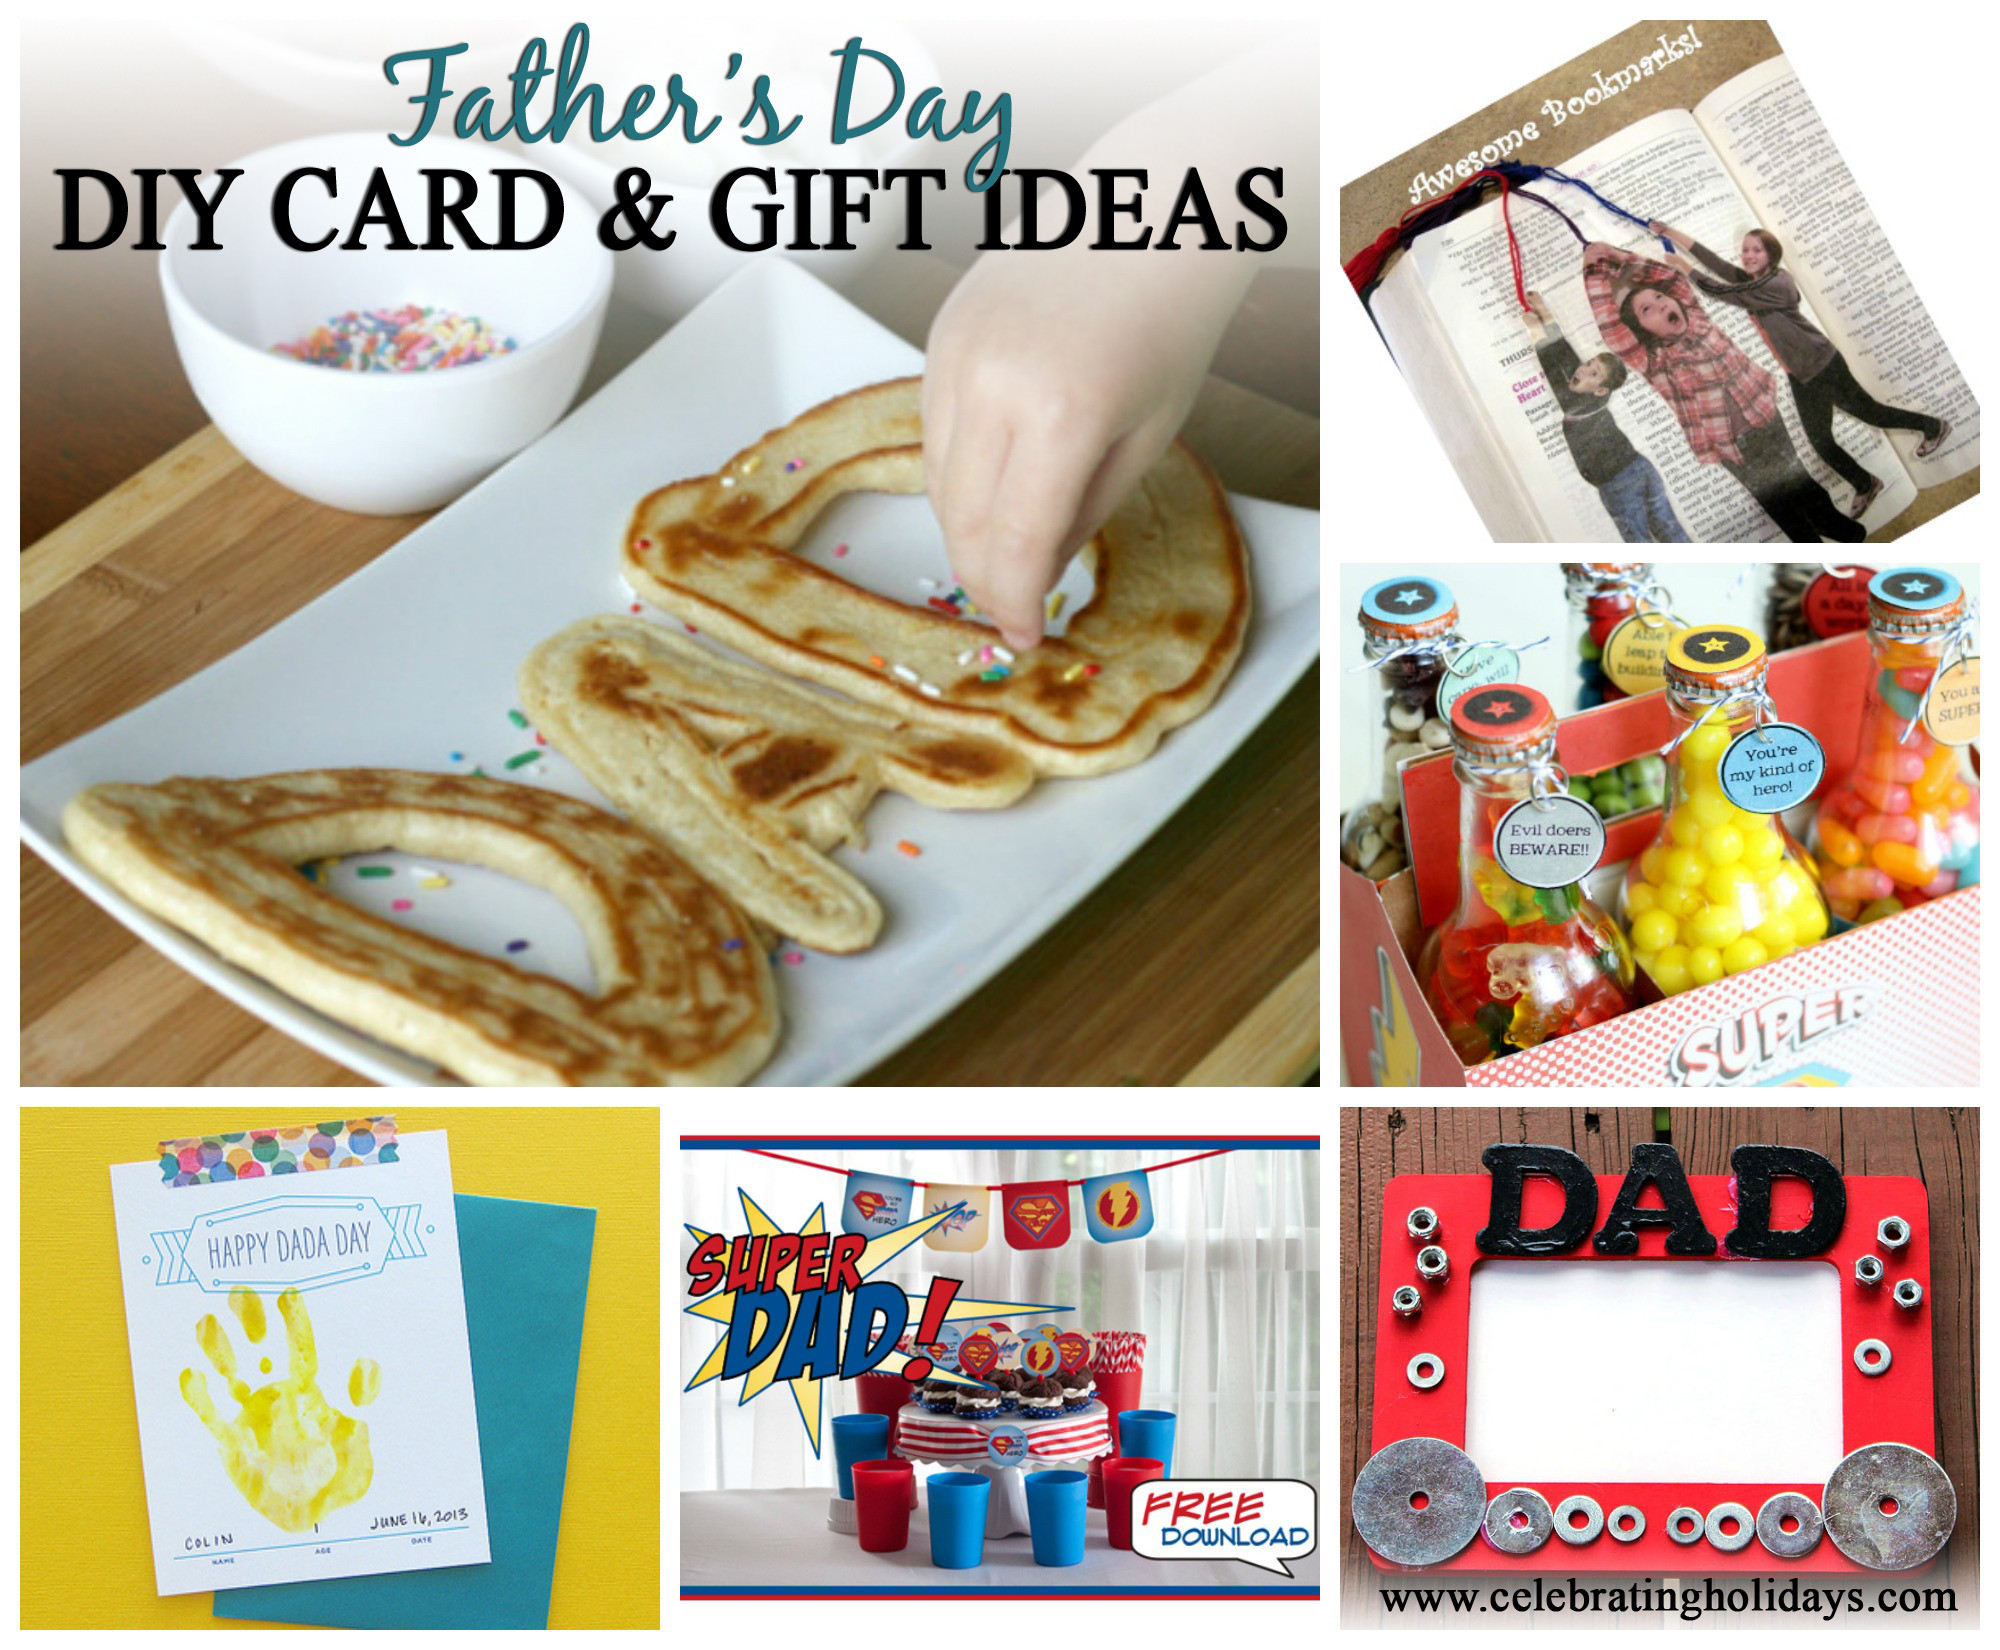 Grandfather'S Day Gift Ideas
 Father’s Day Card and Gift Ideas